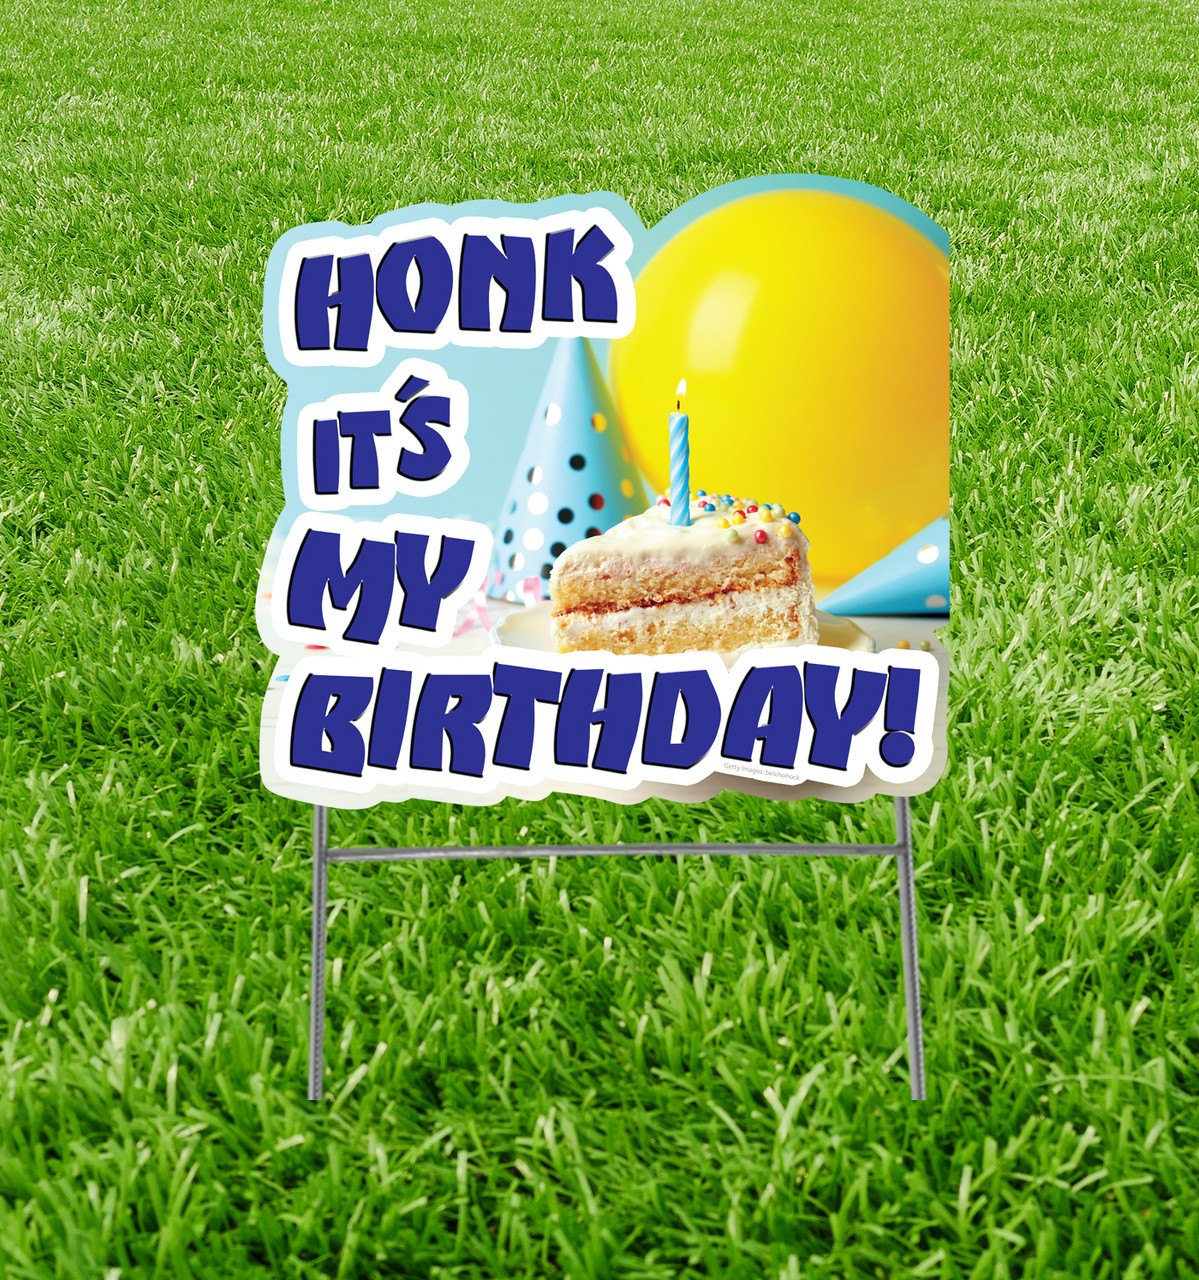 Honk It's My Birthday Cake Yard Sign 15" x 16" with background.